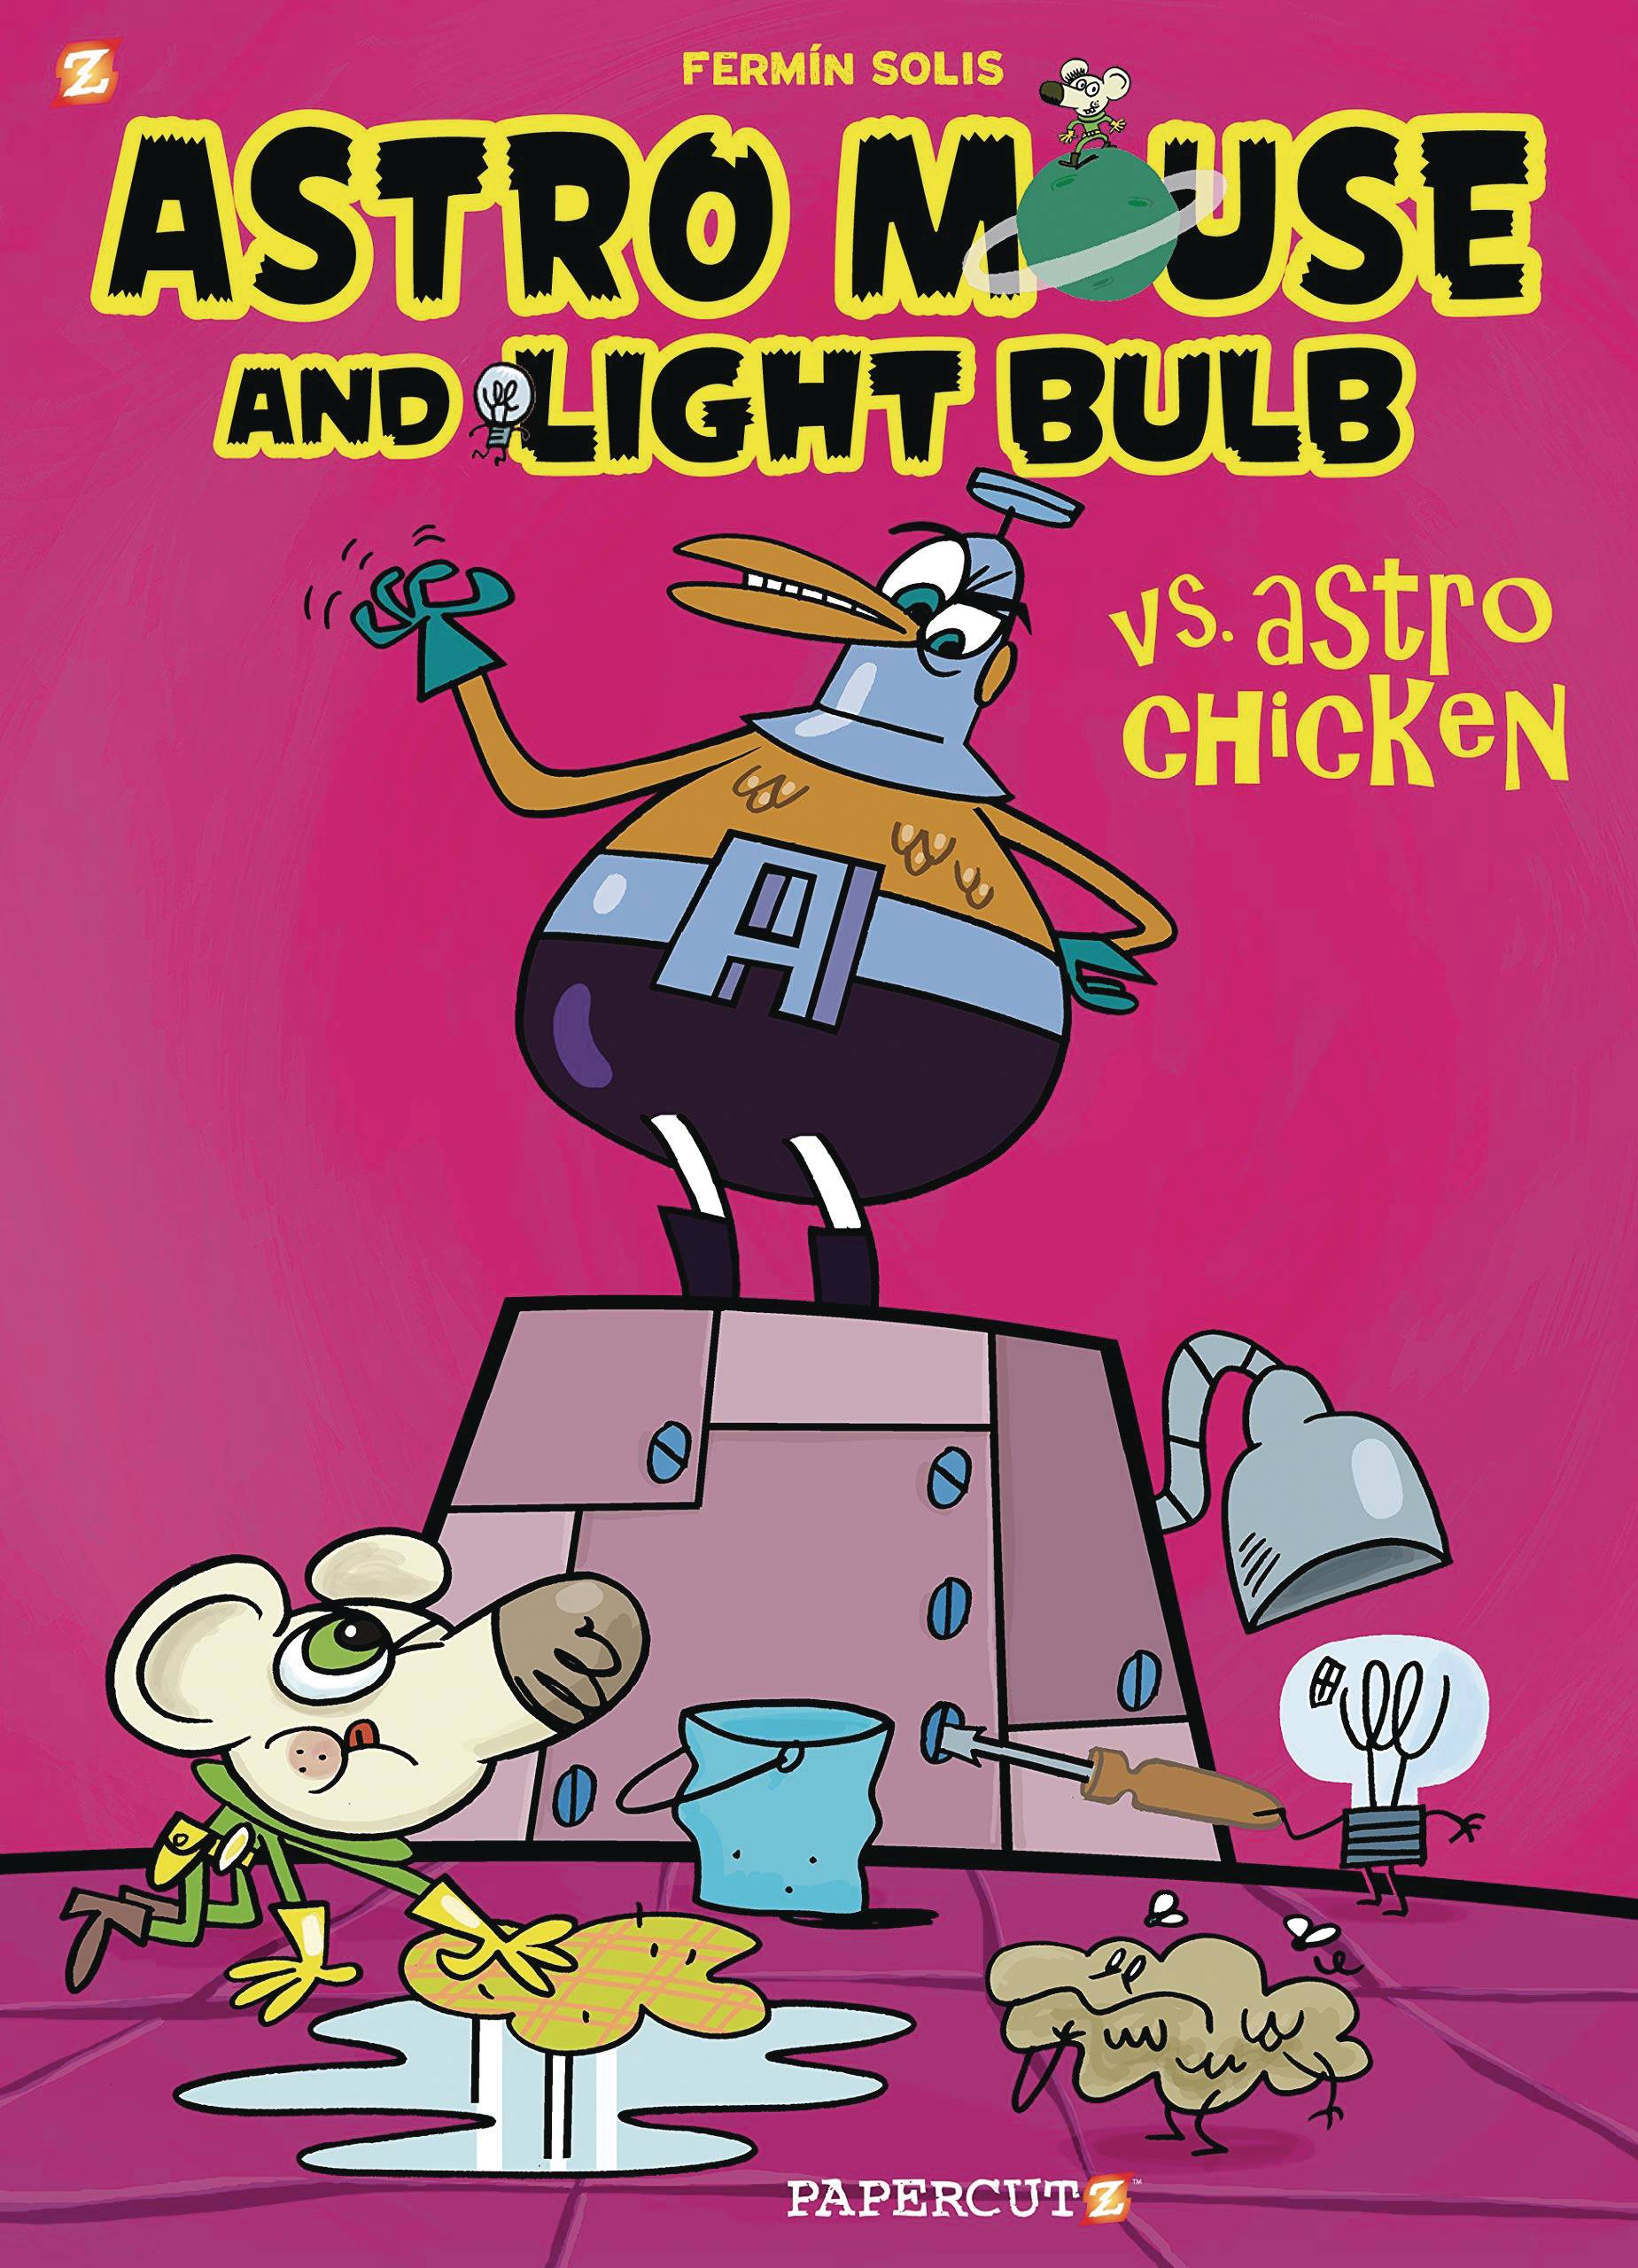 ASTRO MOUSE AND LIGHT BULB HC 01 VS ASTRO CHICKEN